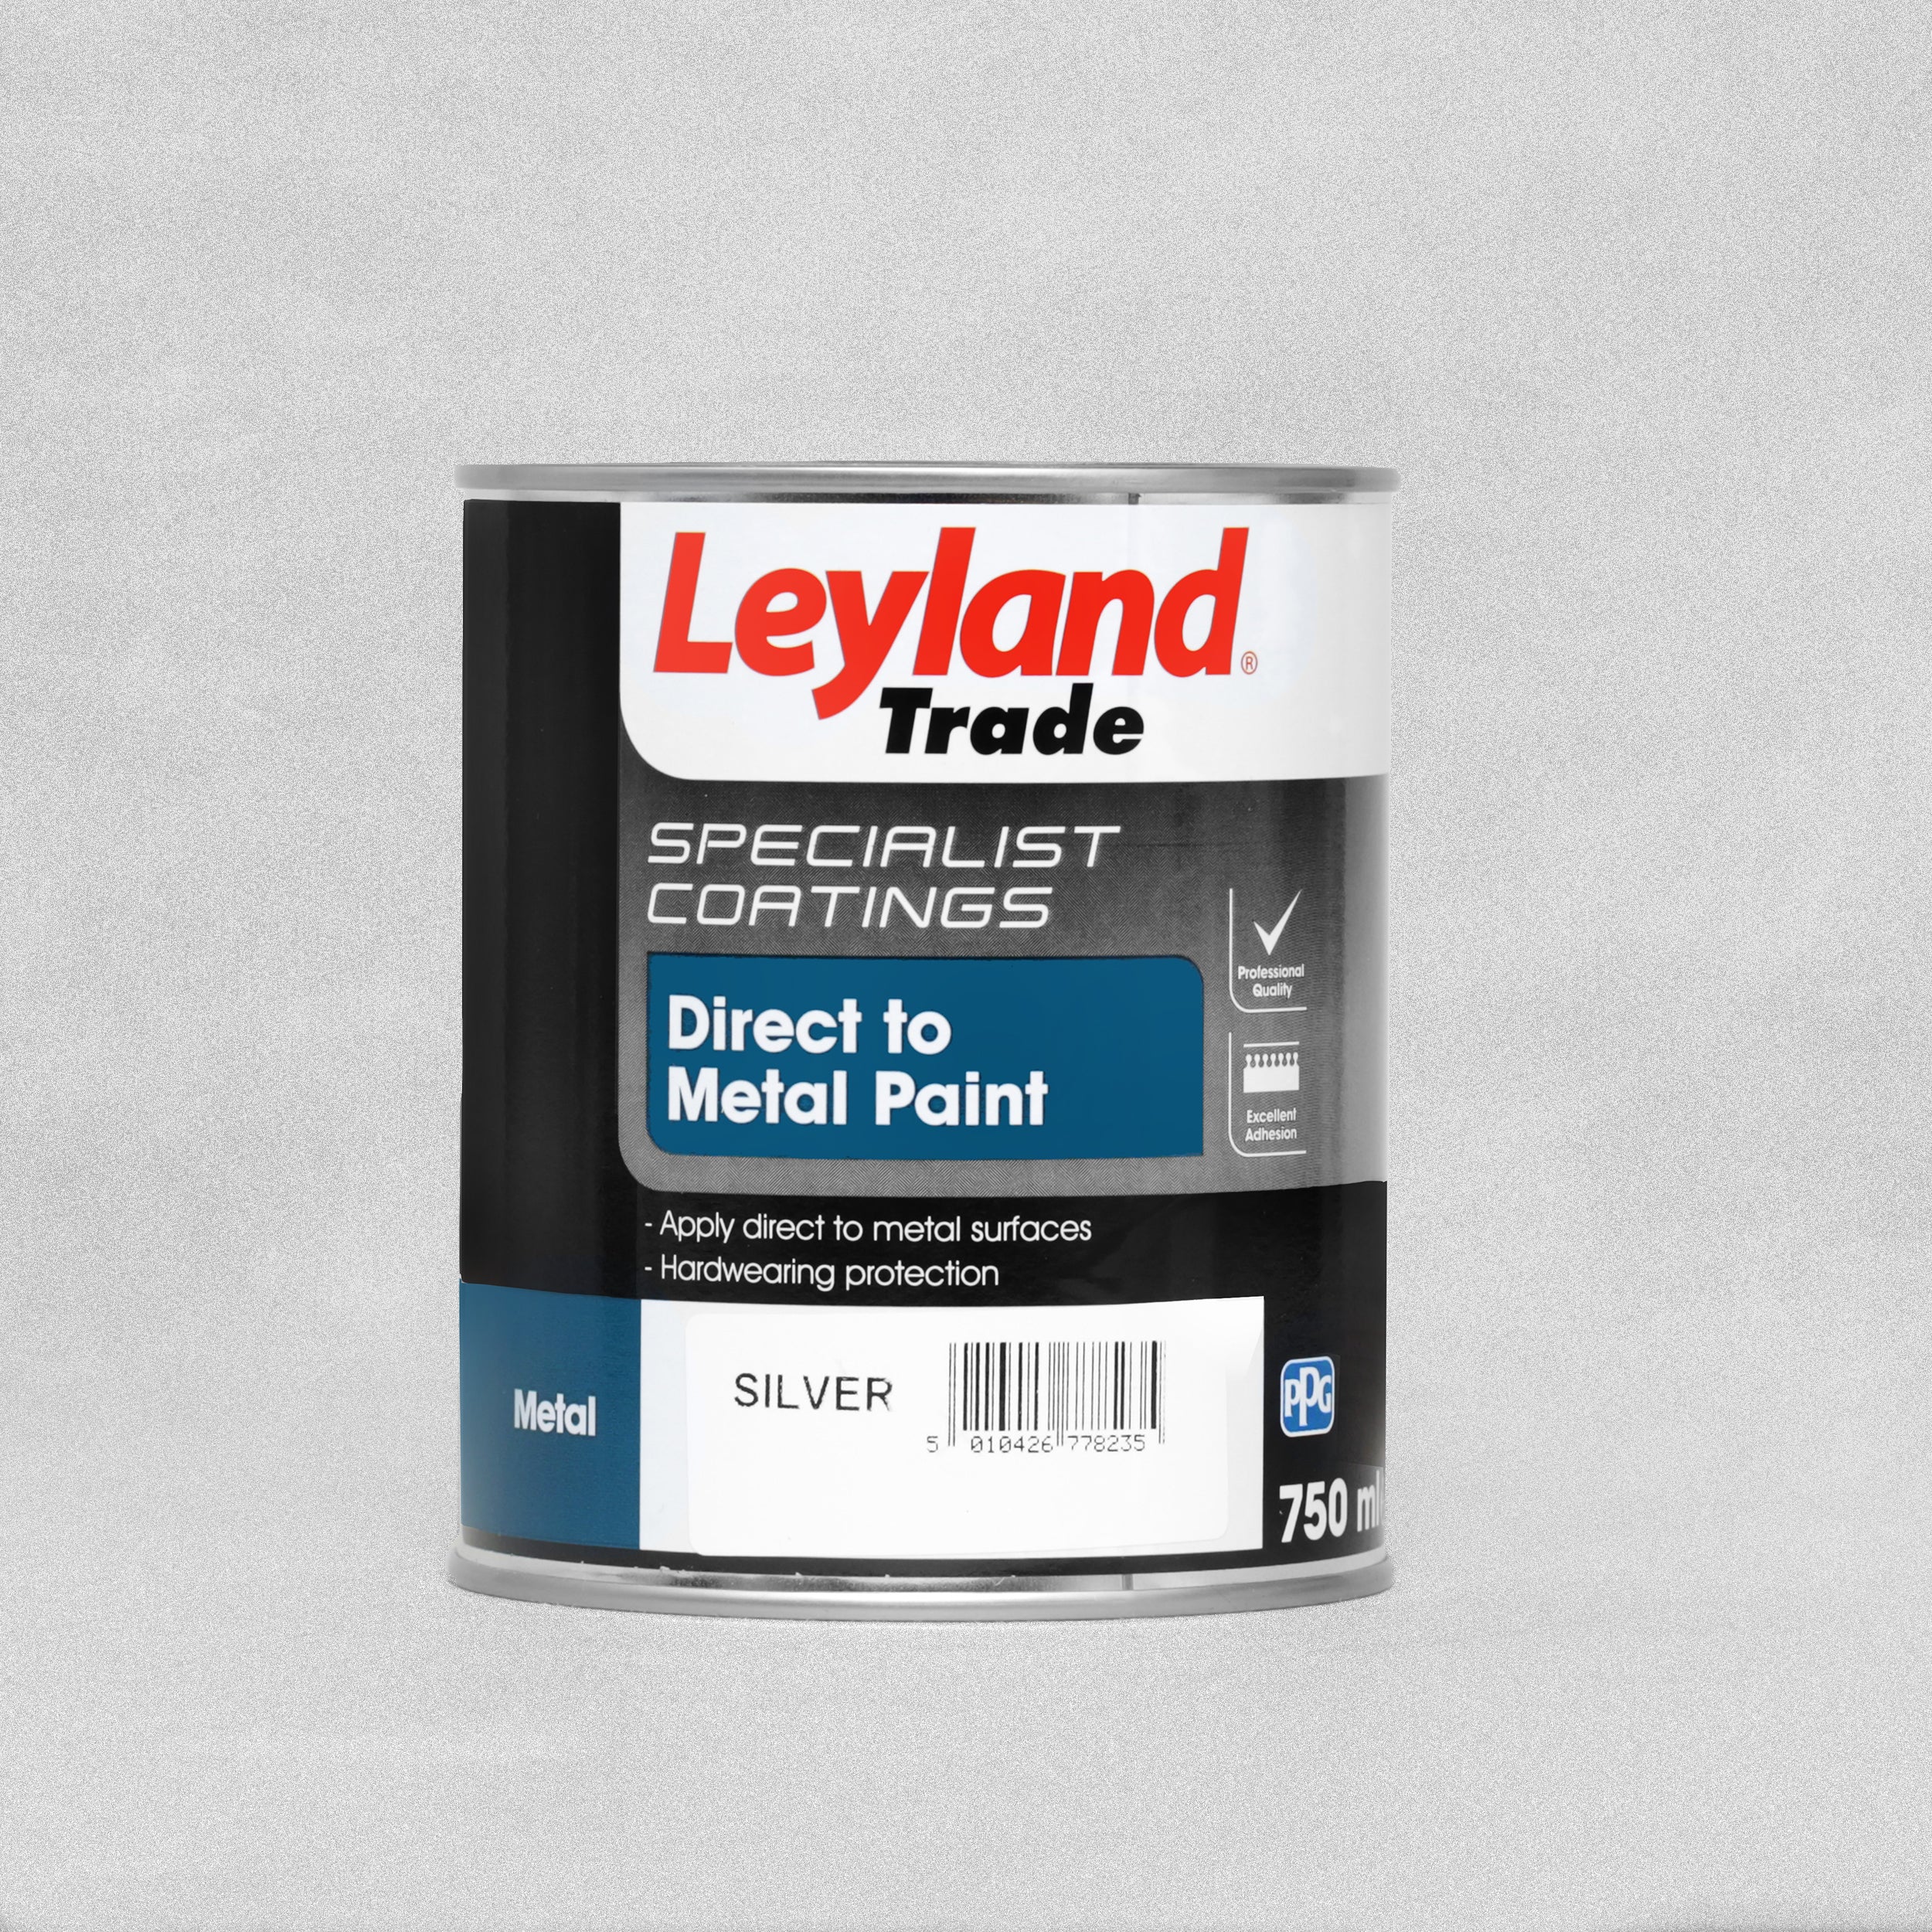 Leyland Trade Specialist Coatings Direct to Metal Paint 750ml - Silver